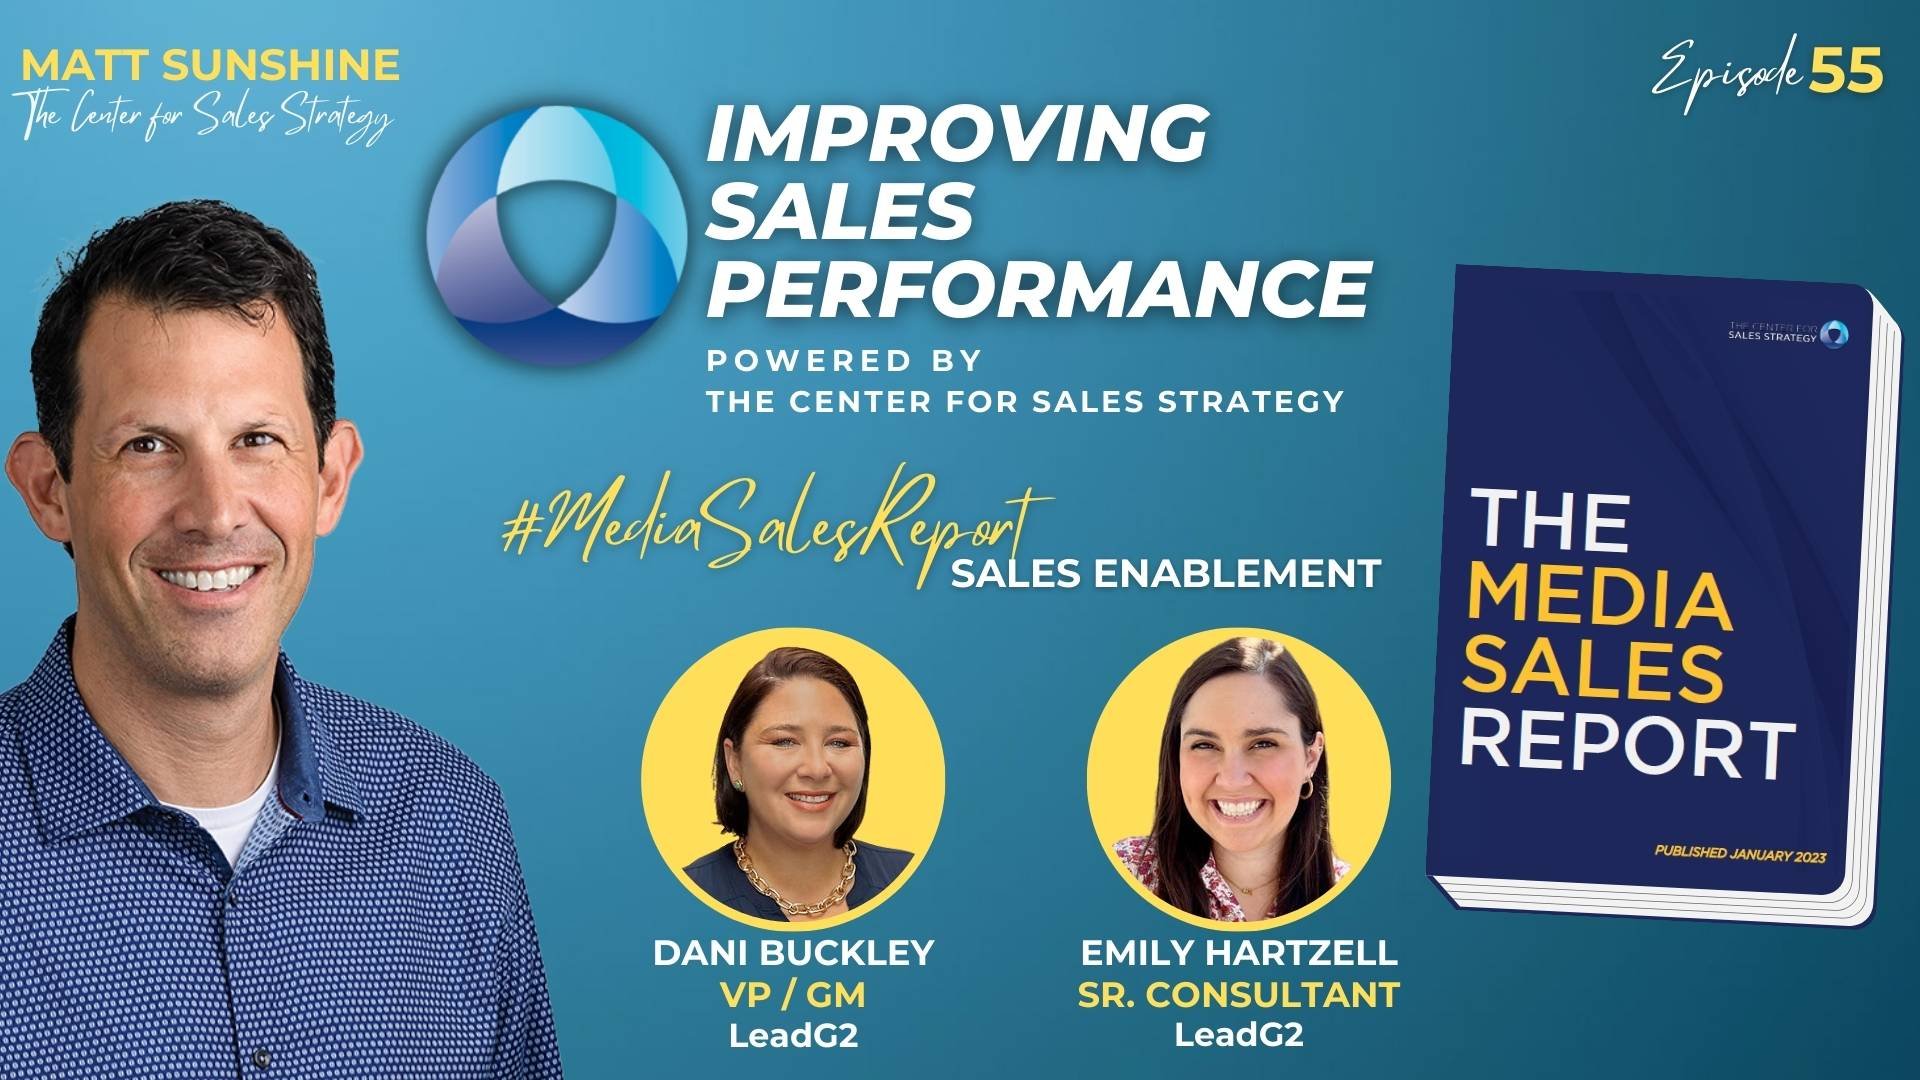 Improving Sales Performance Podcast - Media Sales Report, Sales Enablement Episode with Matt Sunshine, Dani Buckley, and Emily Hartzell